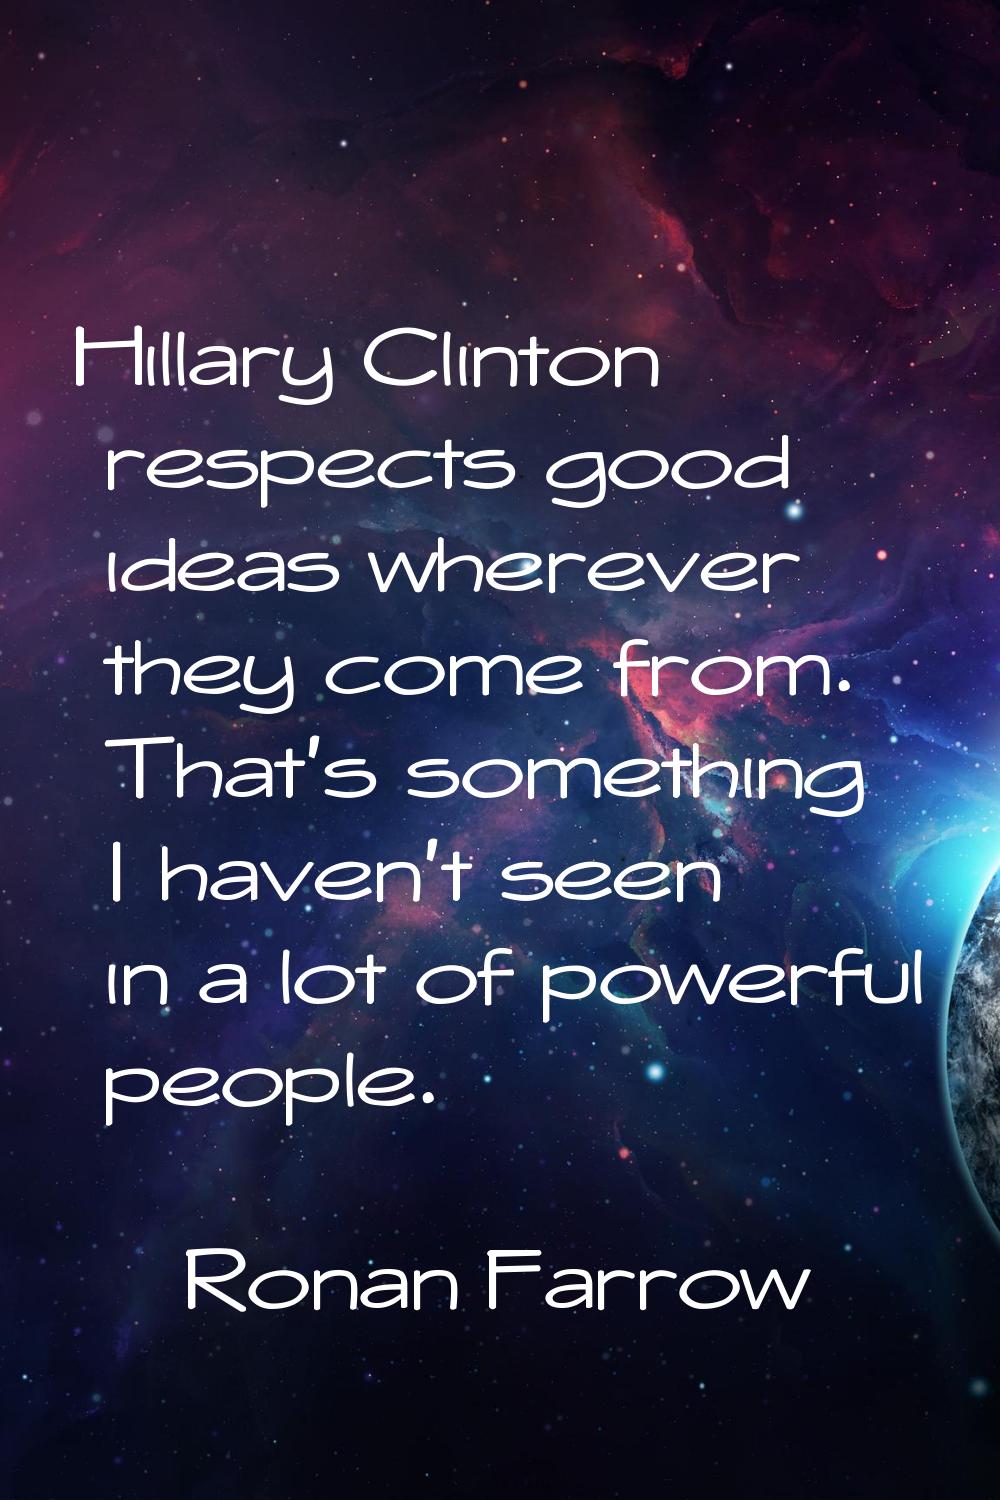 Hillary Clinton respects good ideas wherever they come from. That's something I haven't seen in a l